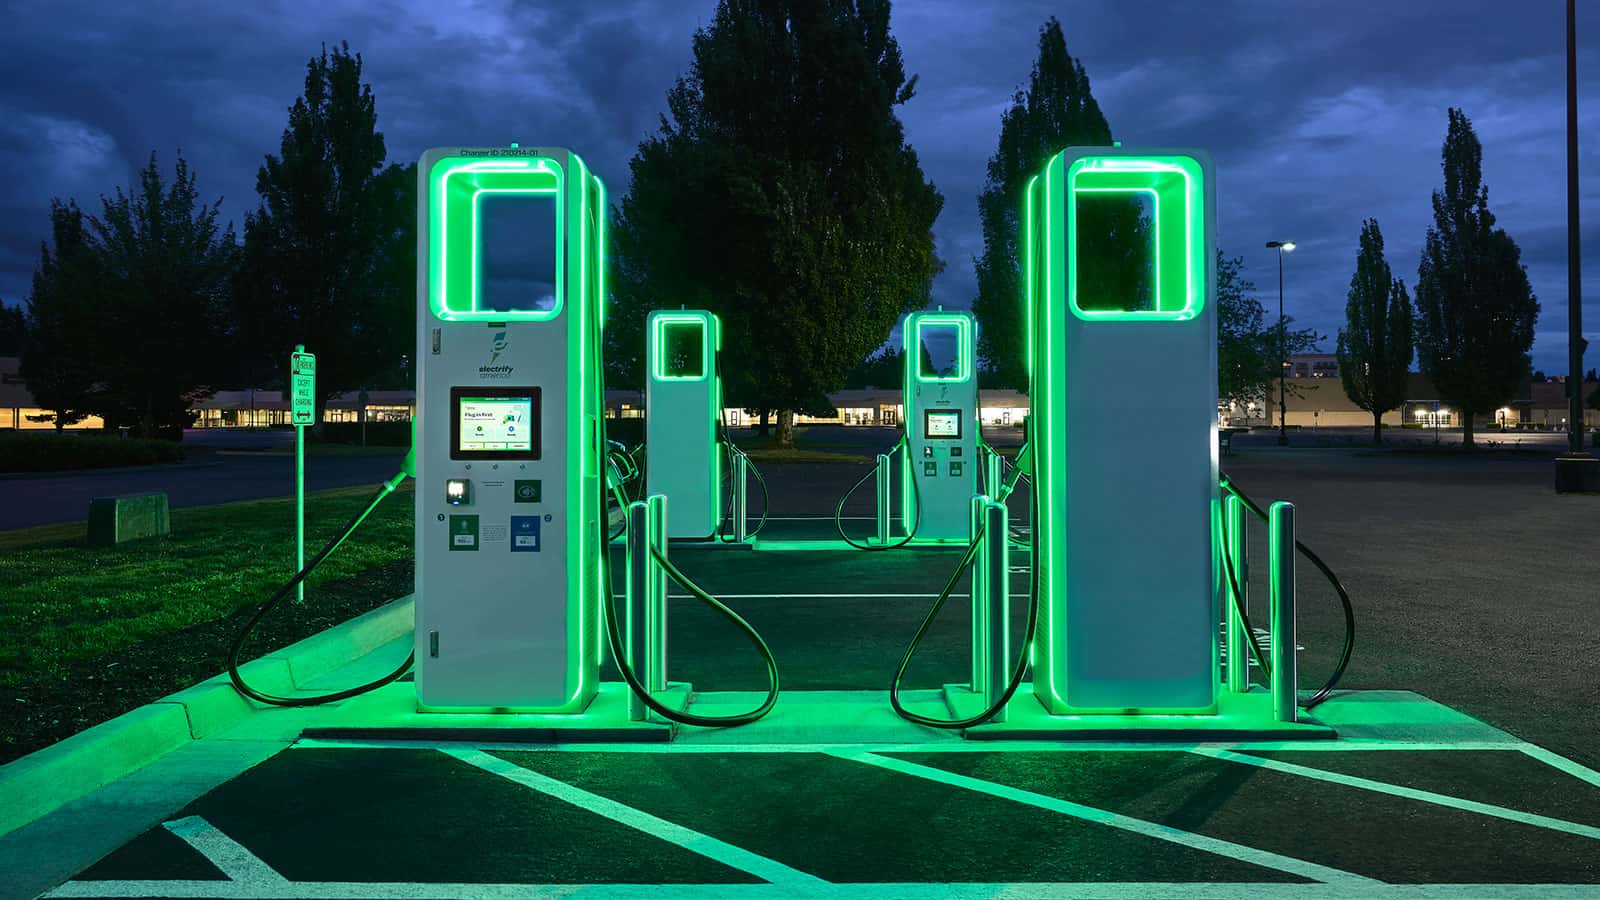 Electrify America EV charging station at night with glowing green lights on charger design